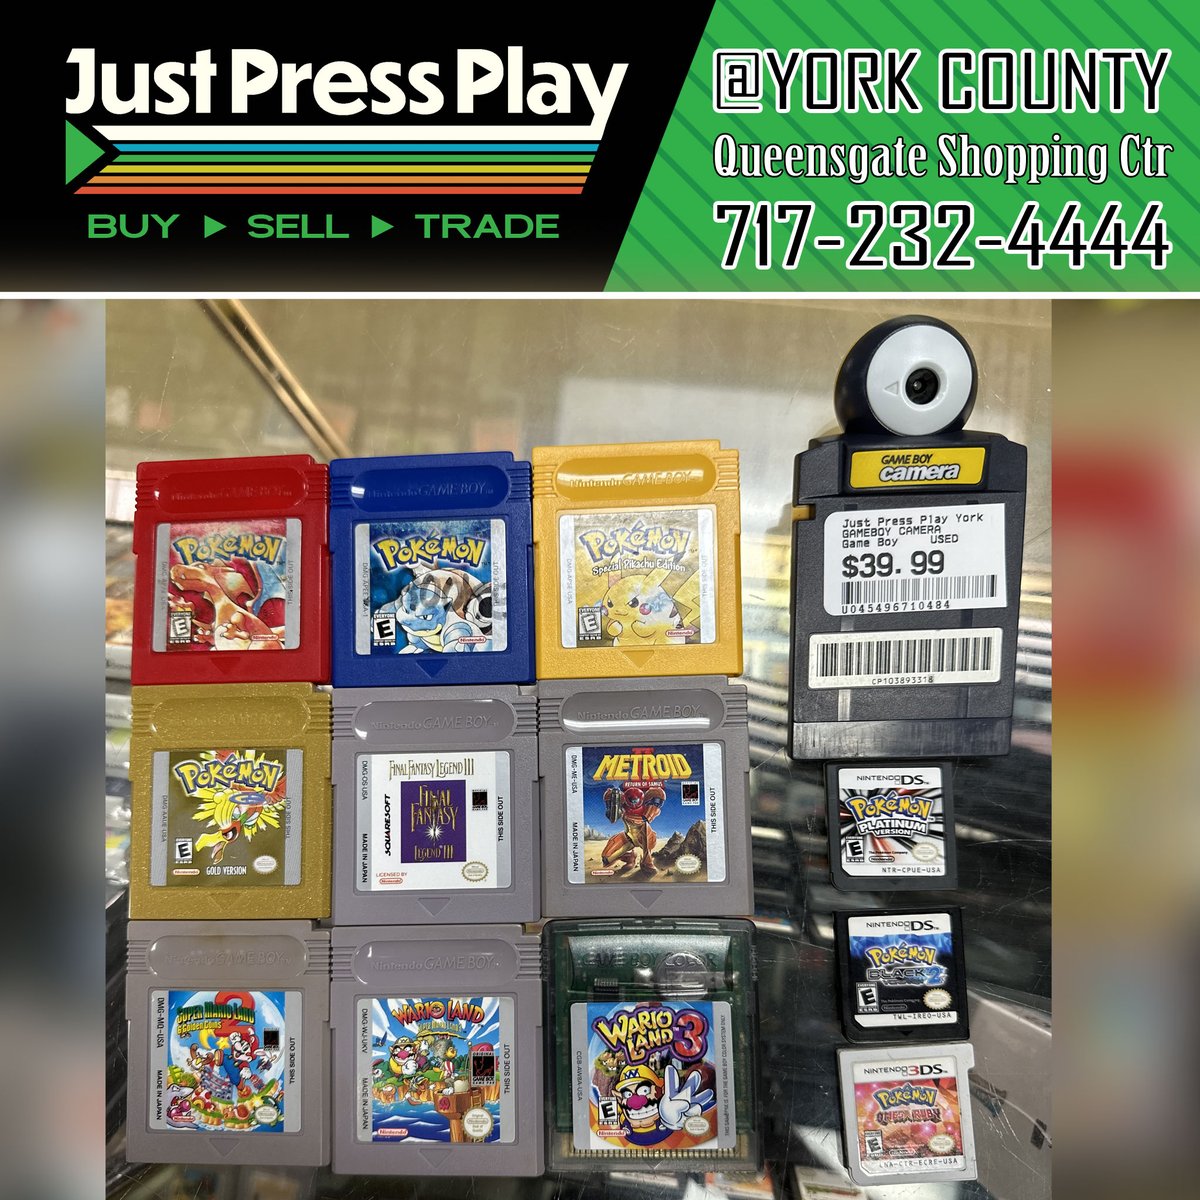 We've got that Game Boy gold you're looking for! 🥇 

A variety of Pokemon games for Game Boy, Nintendo DS, and 3DS, plus Metroid, Wario Land, and Final Fantasy Legend games just traded in at York! 

Who's calling dibs on the Game Boy Camera? 🤳👀

#GameBoy #tradein #pokemon